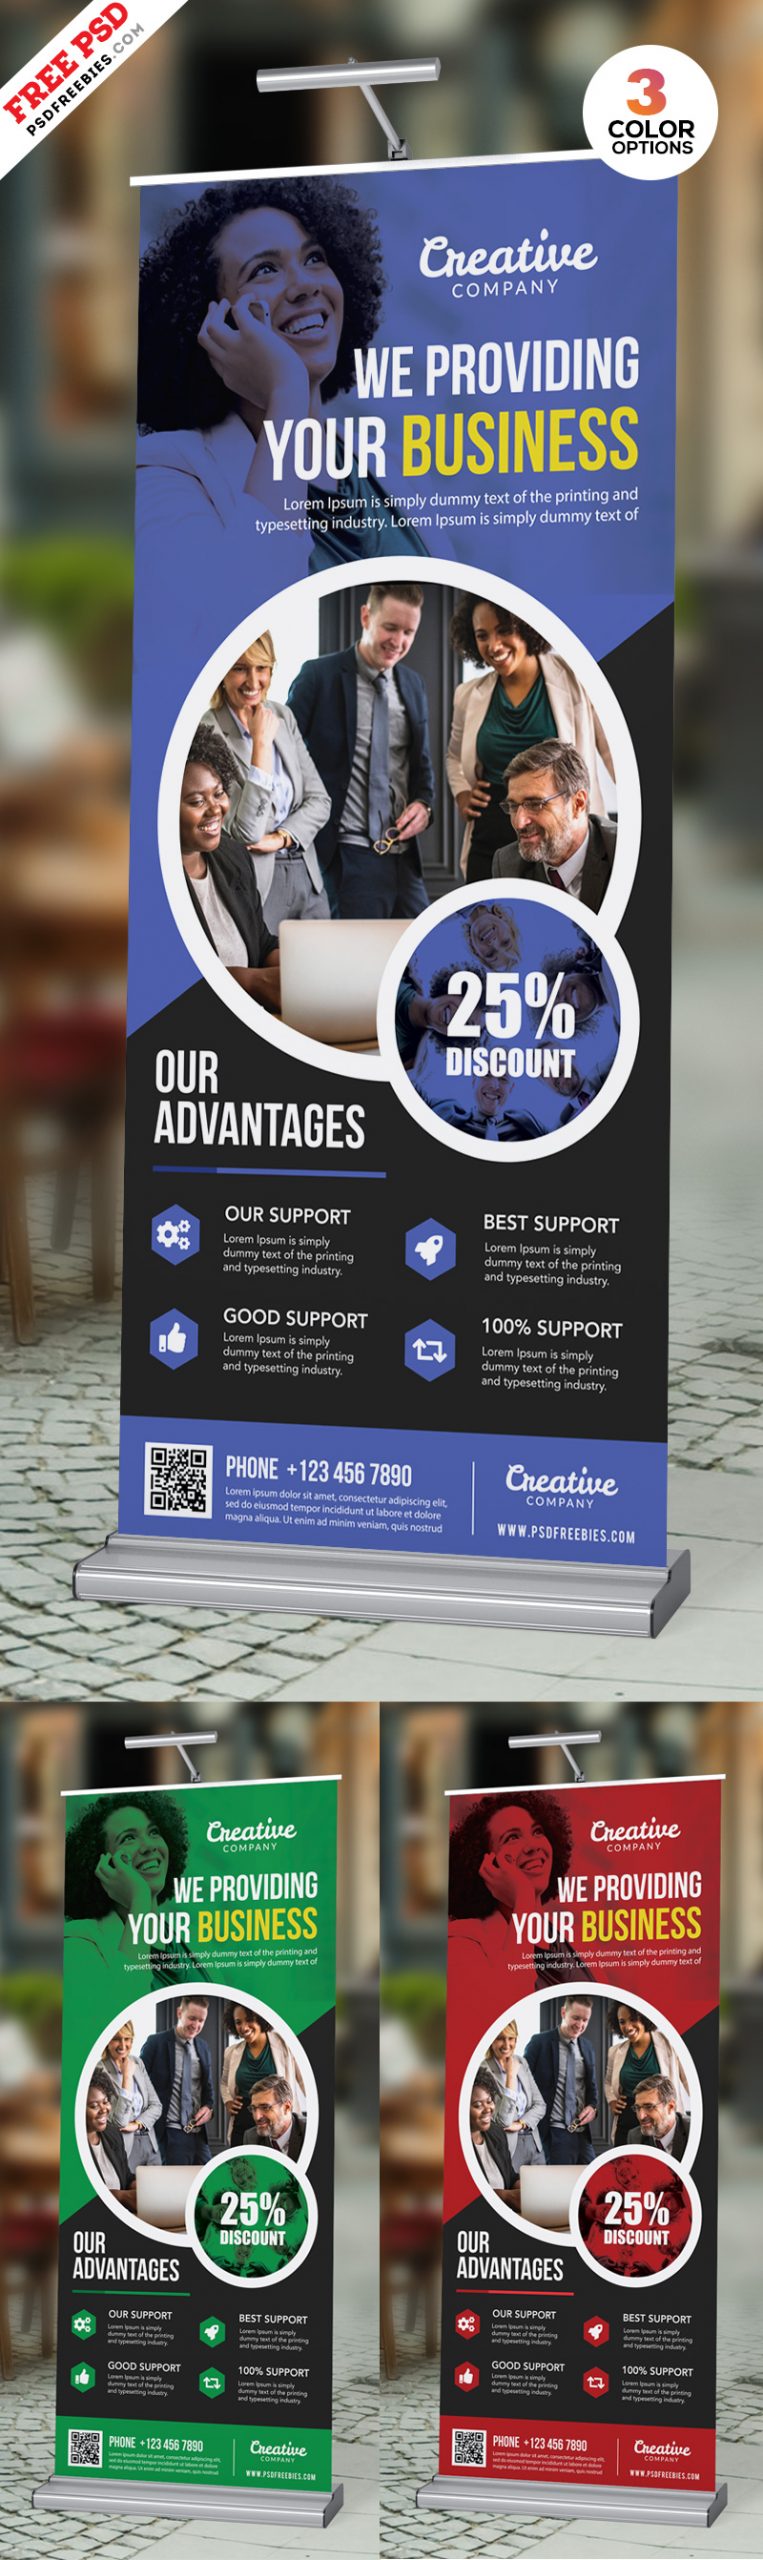 Free Roll-up Banner Design PSD Download